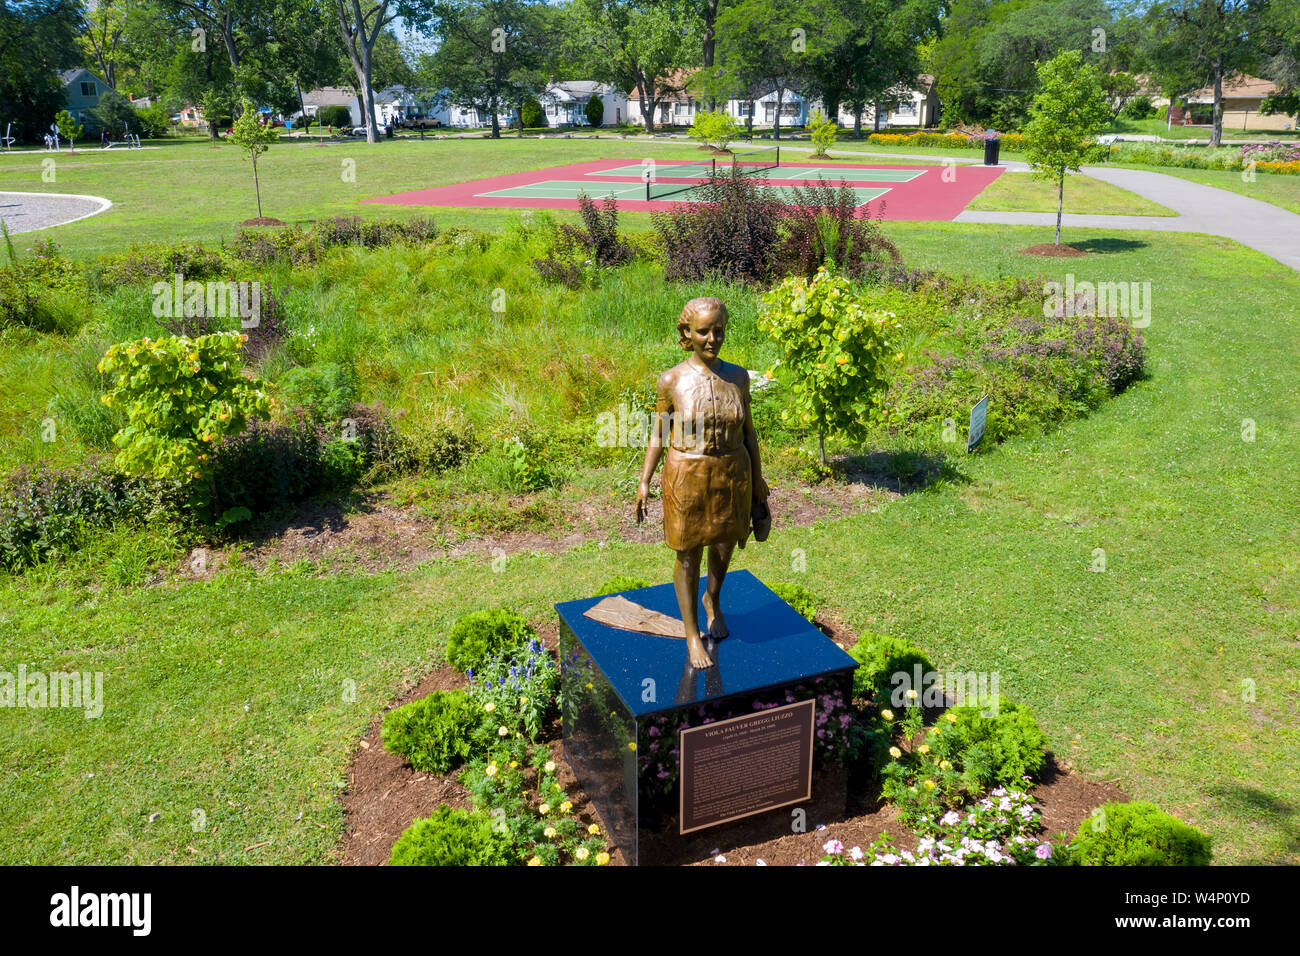 Detroit, Michigan - A statue of Viola Liuzzo, a civil rights martyr, by sculptor Austen Brantley. Liuzzo traveled from her Detroit home in 1965 to joi Stock Photo